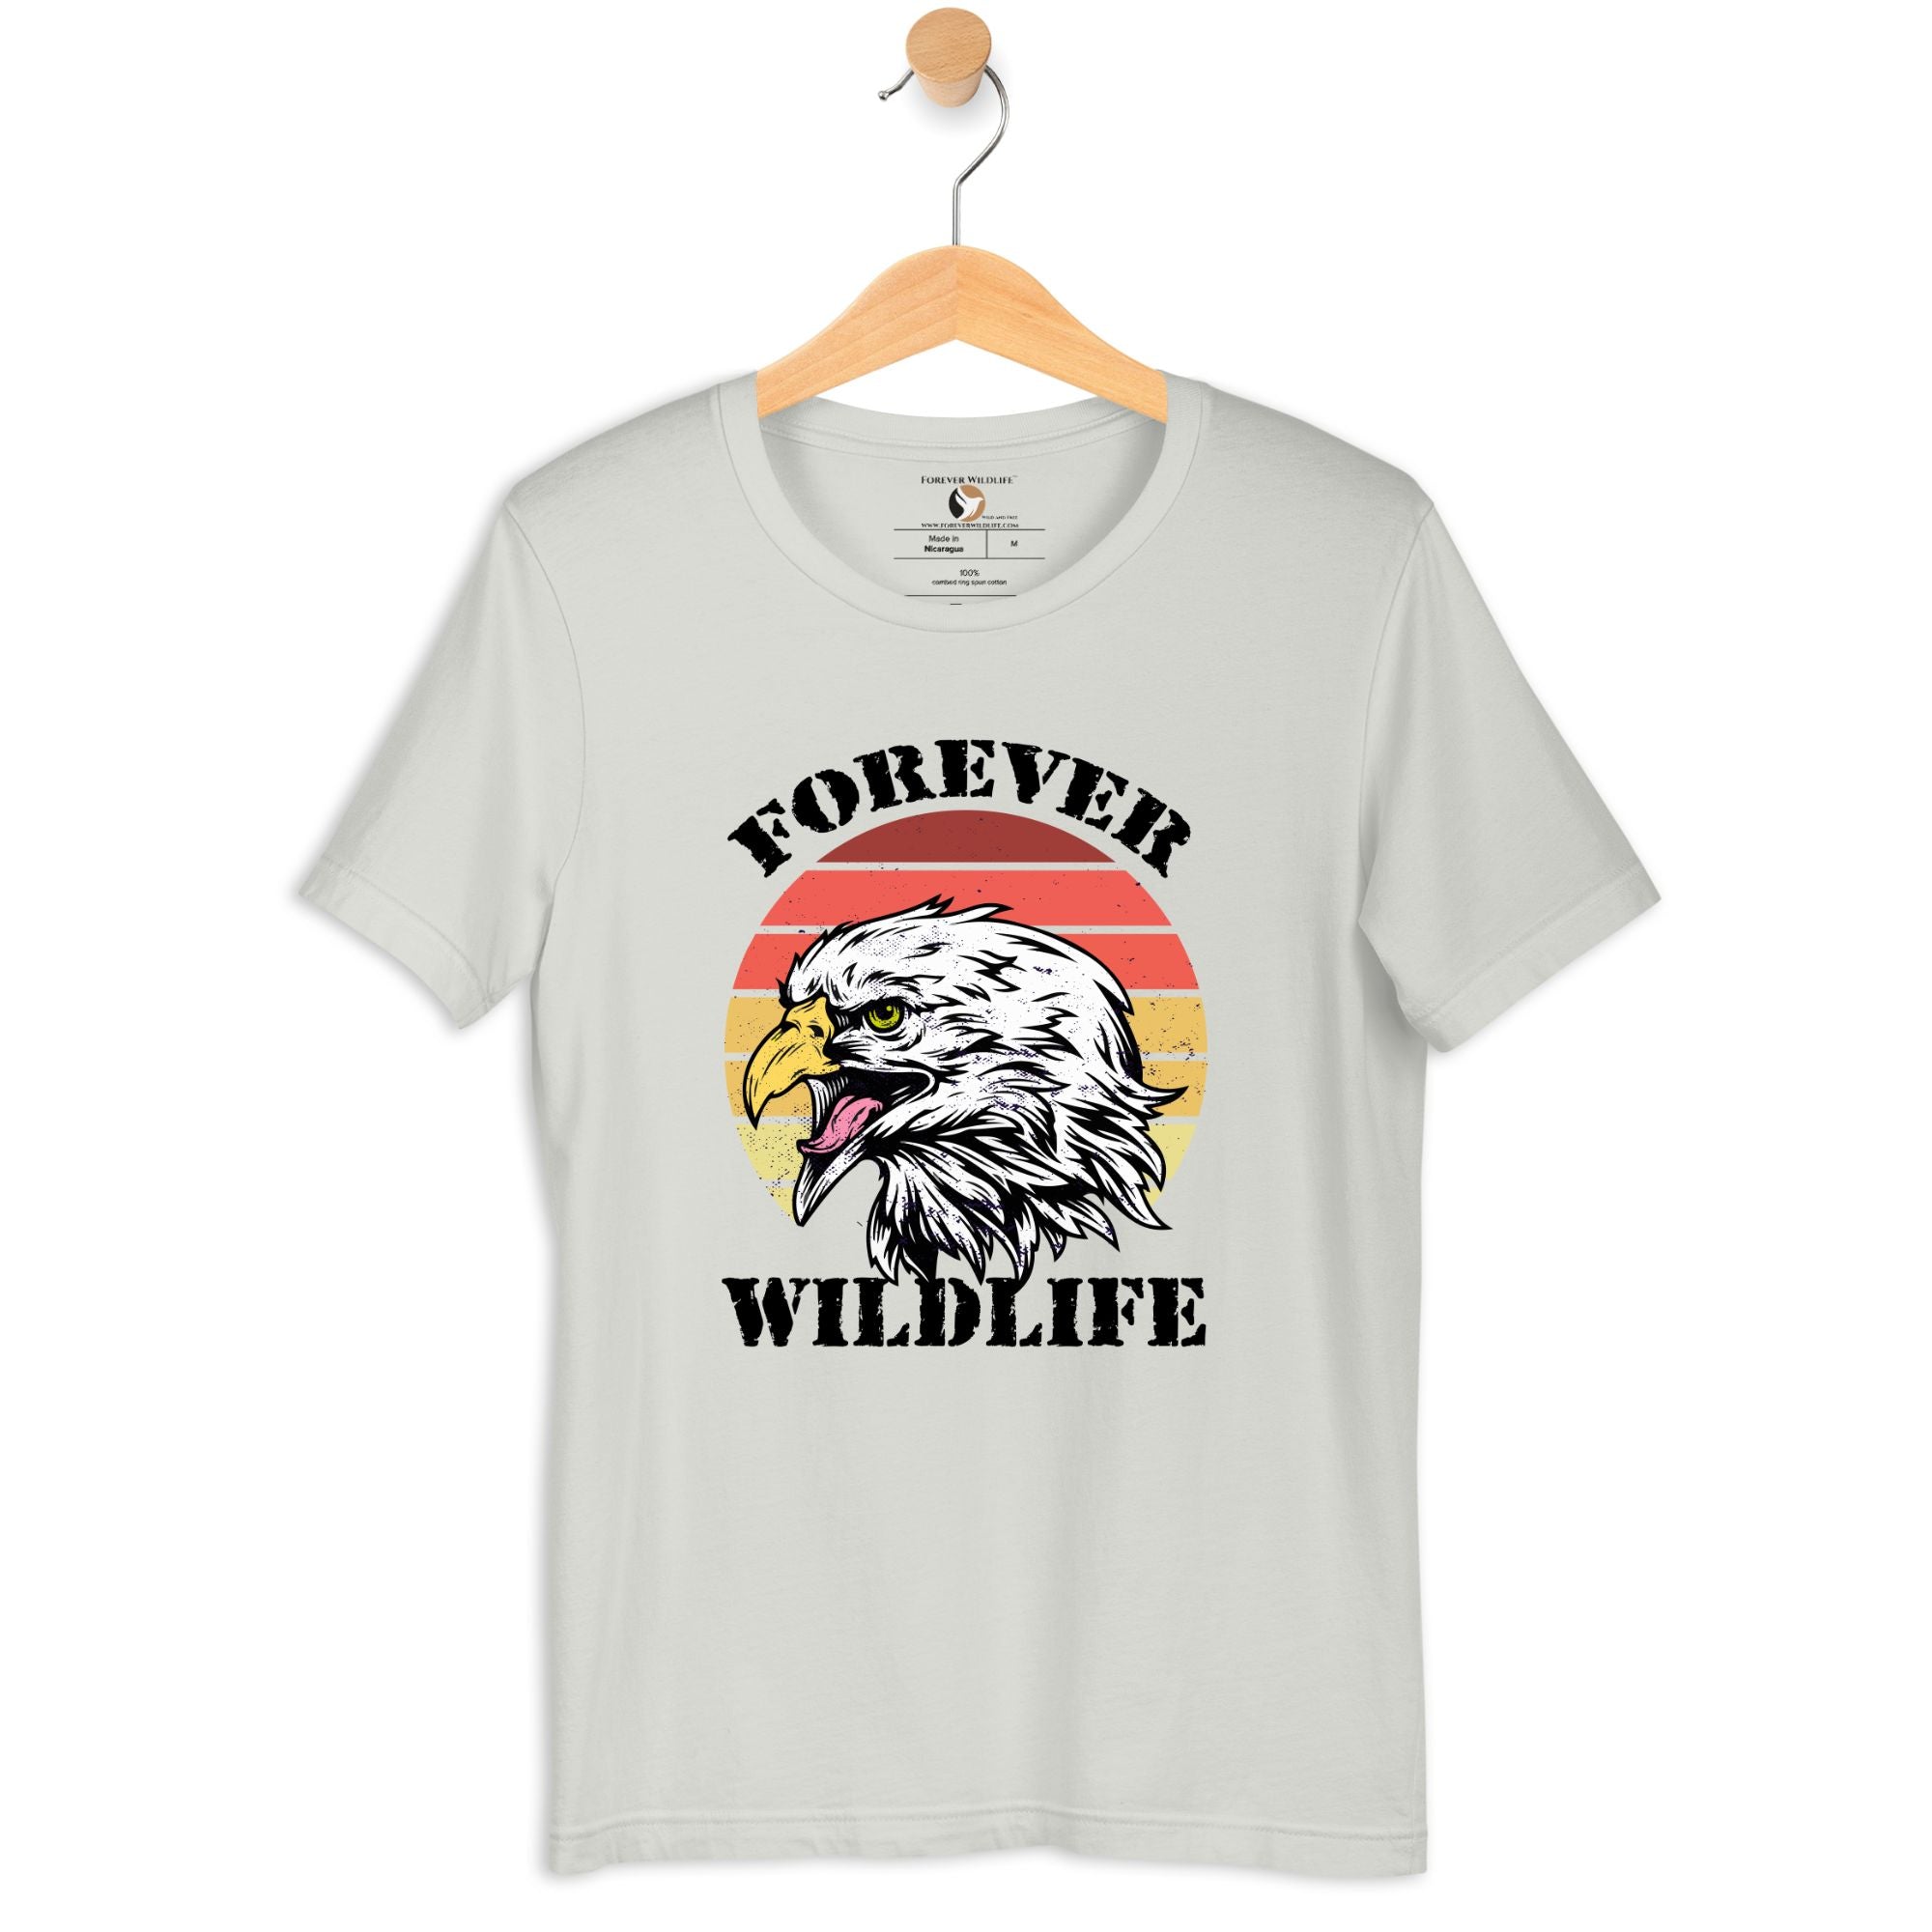 Eagle T-Shirt in Silver – Premium Wildlife T-Shirt Design, Eagle Shirts and Wildlife Clothing from Forever Wildlife